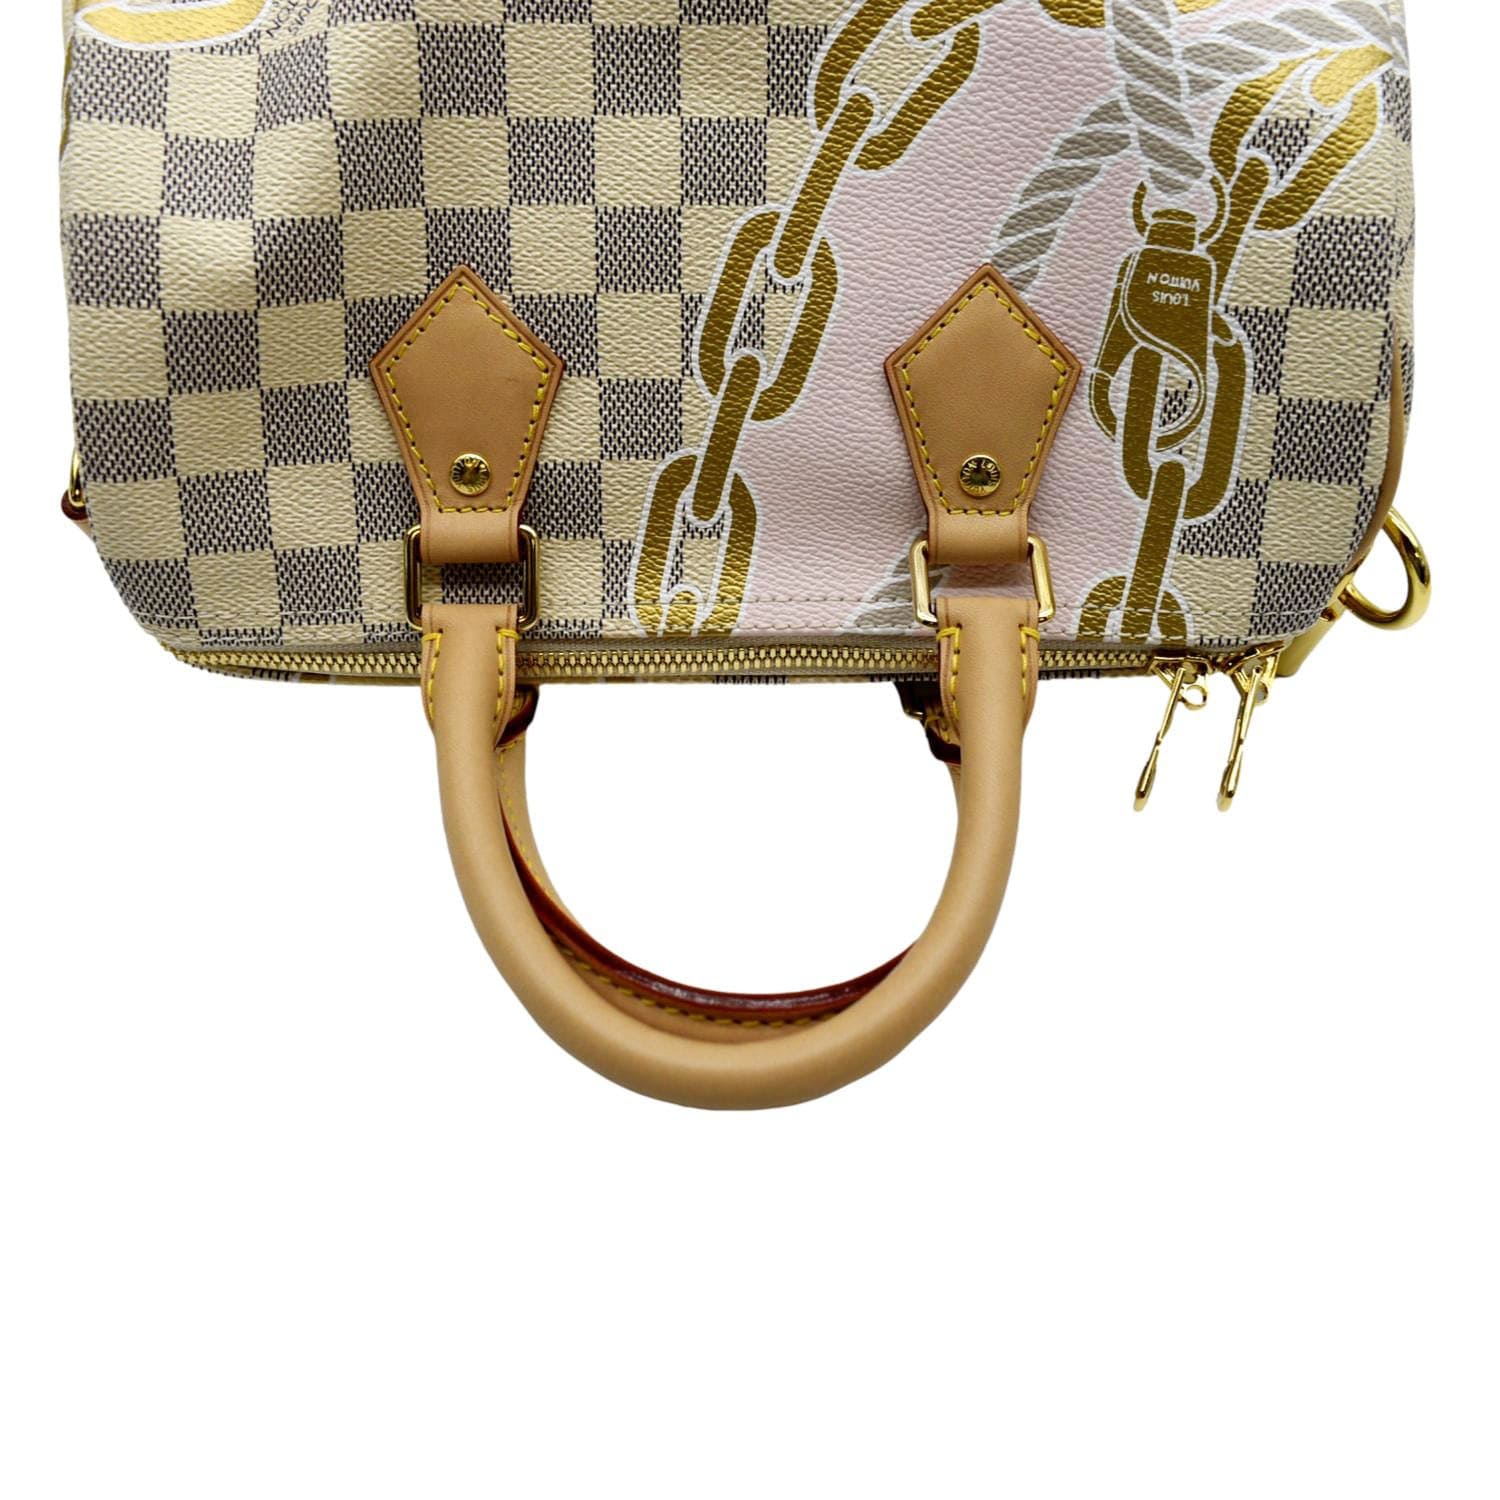 Speedy Bandouliere 25 Damier Top handle bag in Coated canvas, Gold